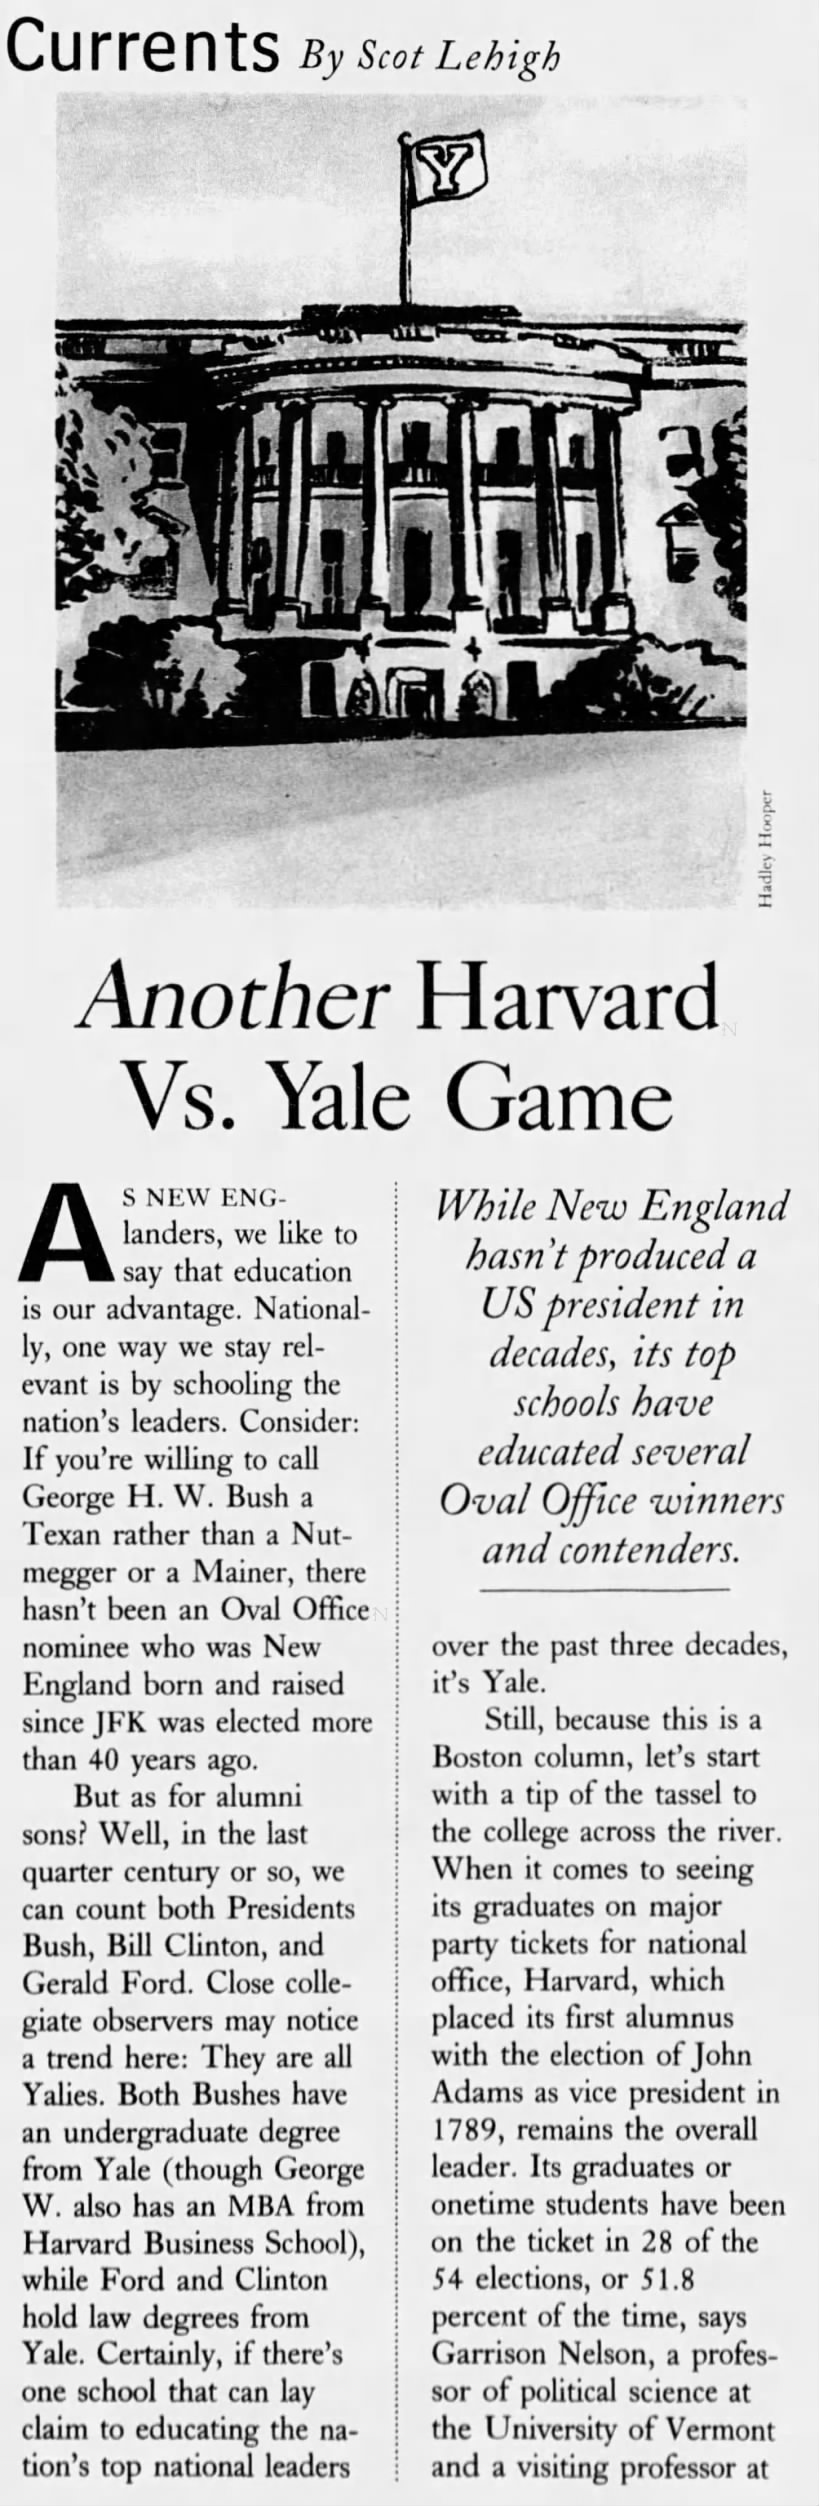 Another Harvard Vs. Yale Game